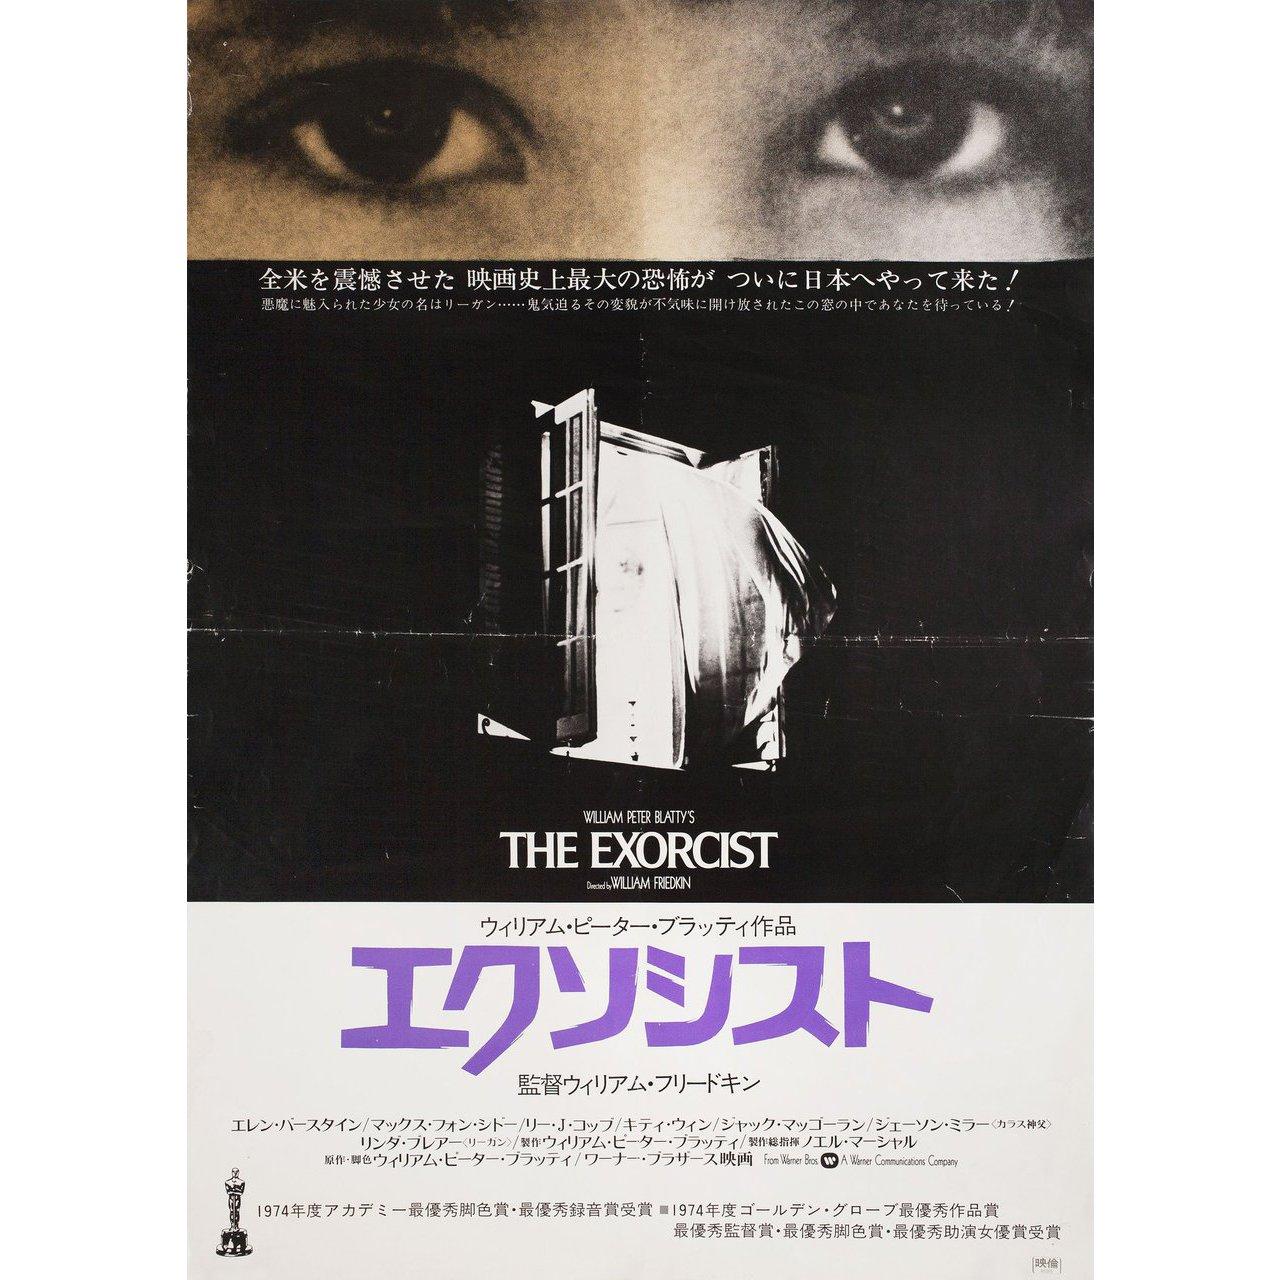 Original 1979 Japanese B2 poster for the 1973 film The Exorcist directed by William Friedkin with Ellen Burstyn / Max von Sydow / Lee J. Cobb / Kitty Winn. Good-very good condition, folded with much wear. Many original posters were issued folded or